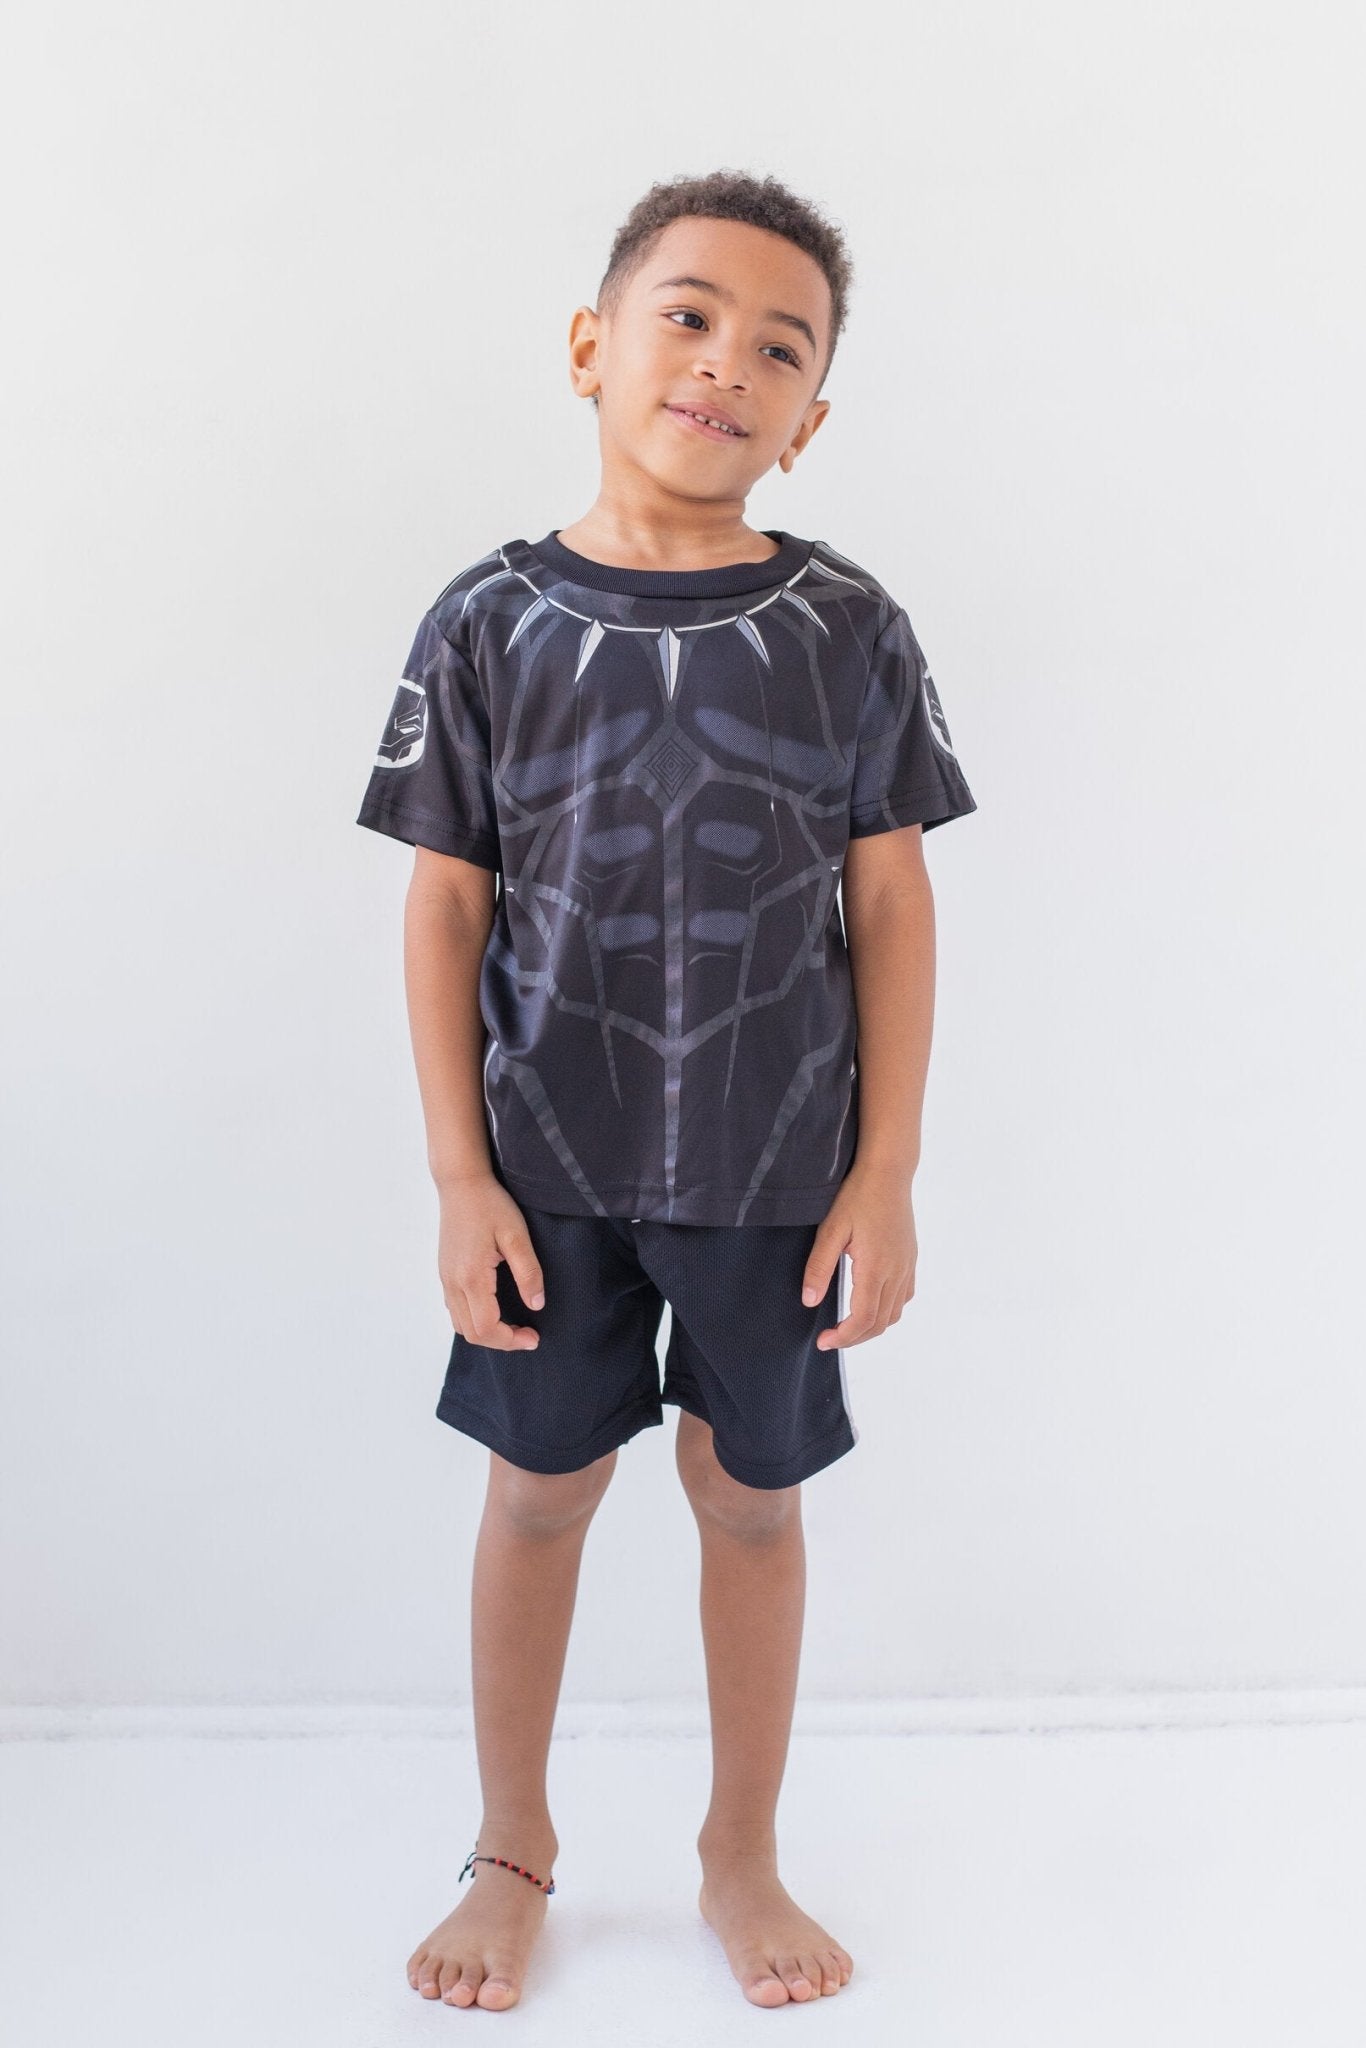 Marvel Avengers Black Panther Metallic Print Athletic T-Shirt and Shorts Outfit Set - imagikids